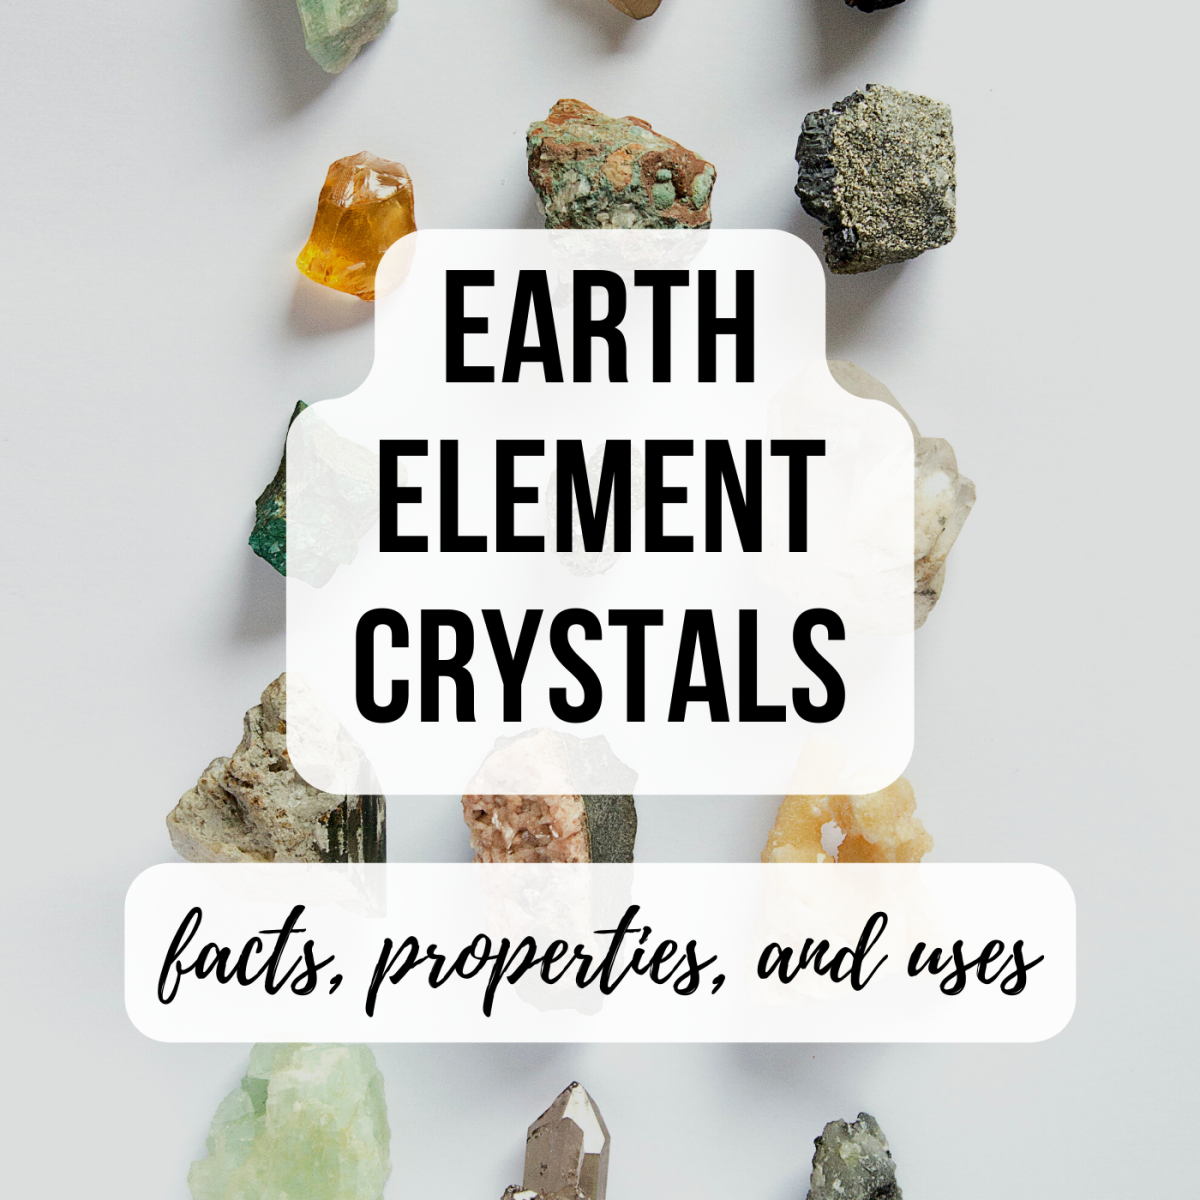 Seven Crystals Associated With the Earth Element